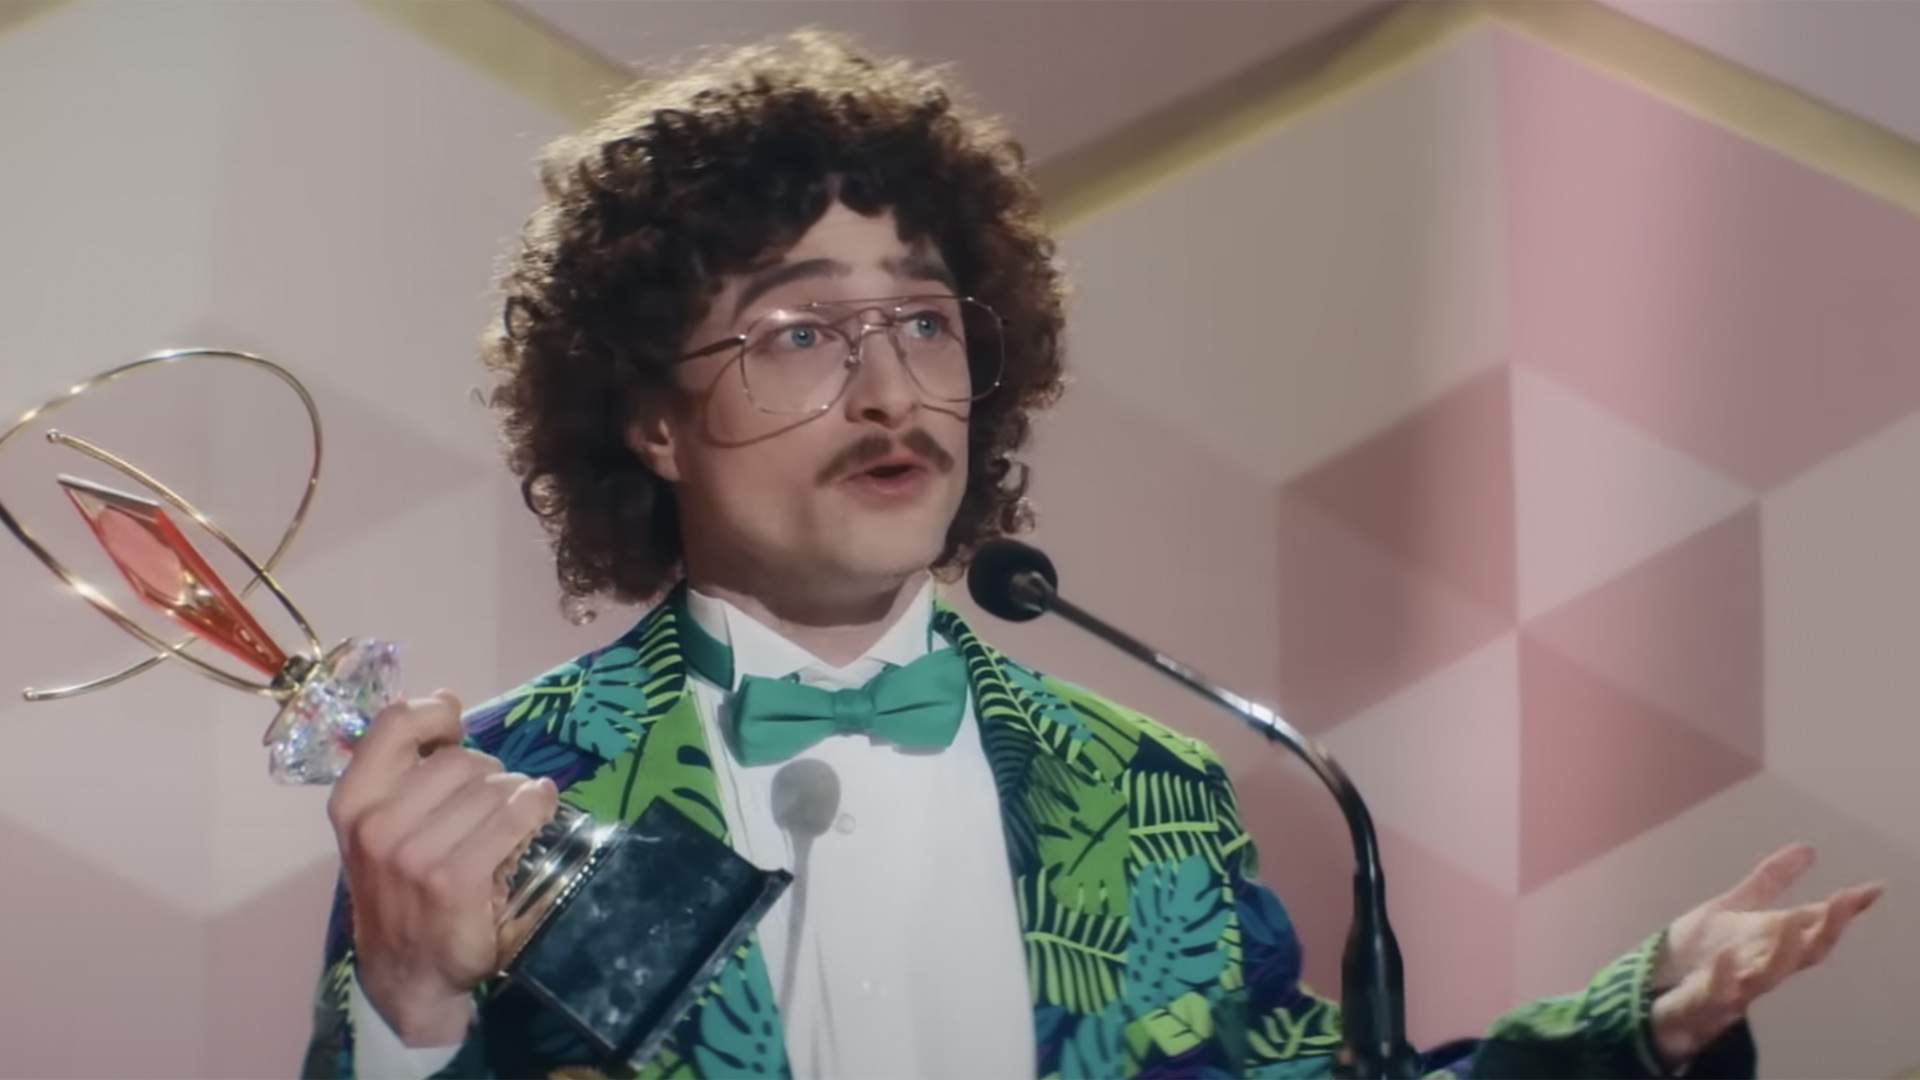 Accordions, Meeting Madonna and Daniel Radcliffe as Al Yankovic: They're All In the 'Weird' Trailer